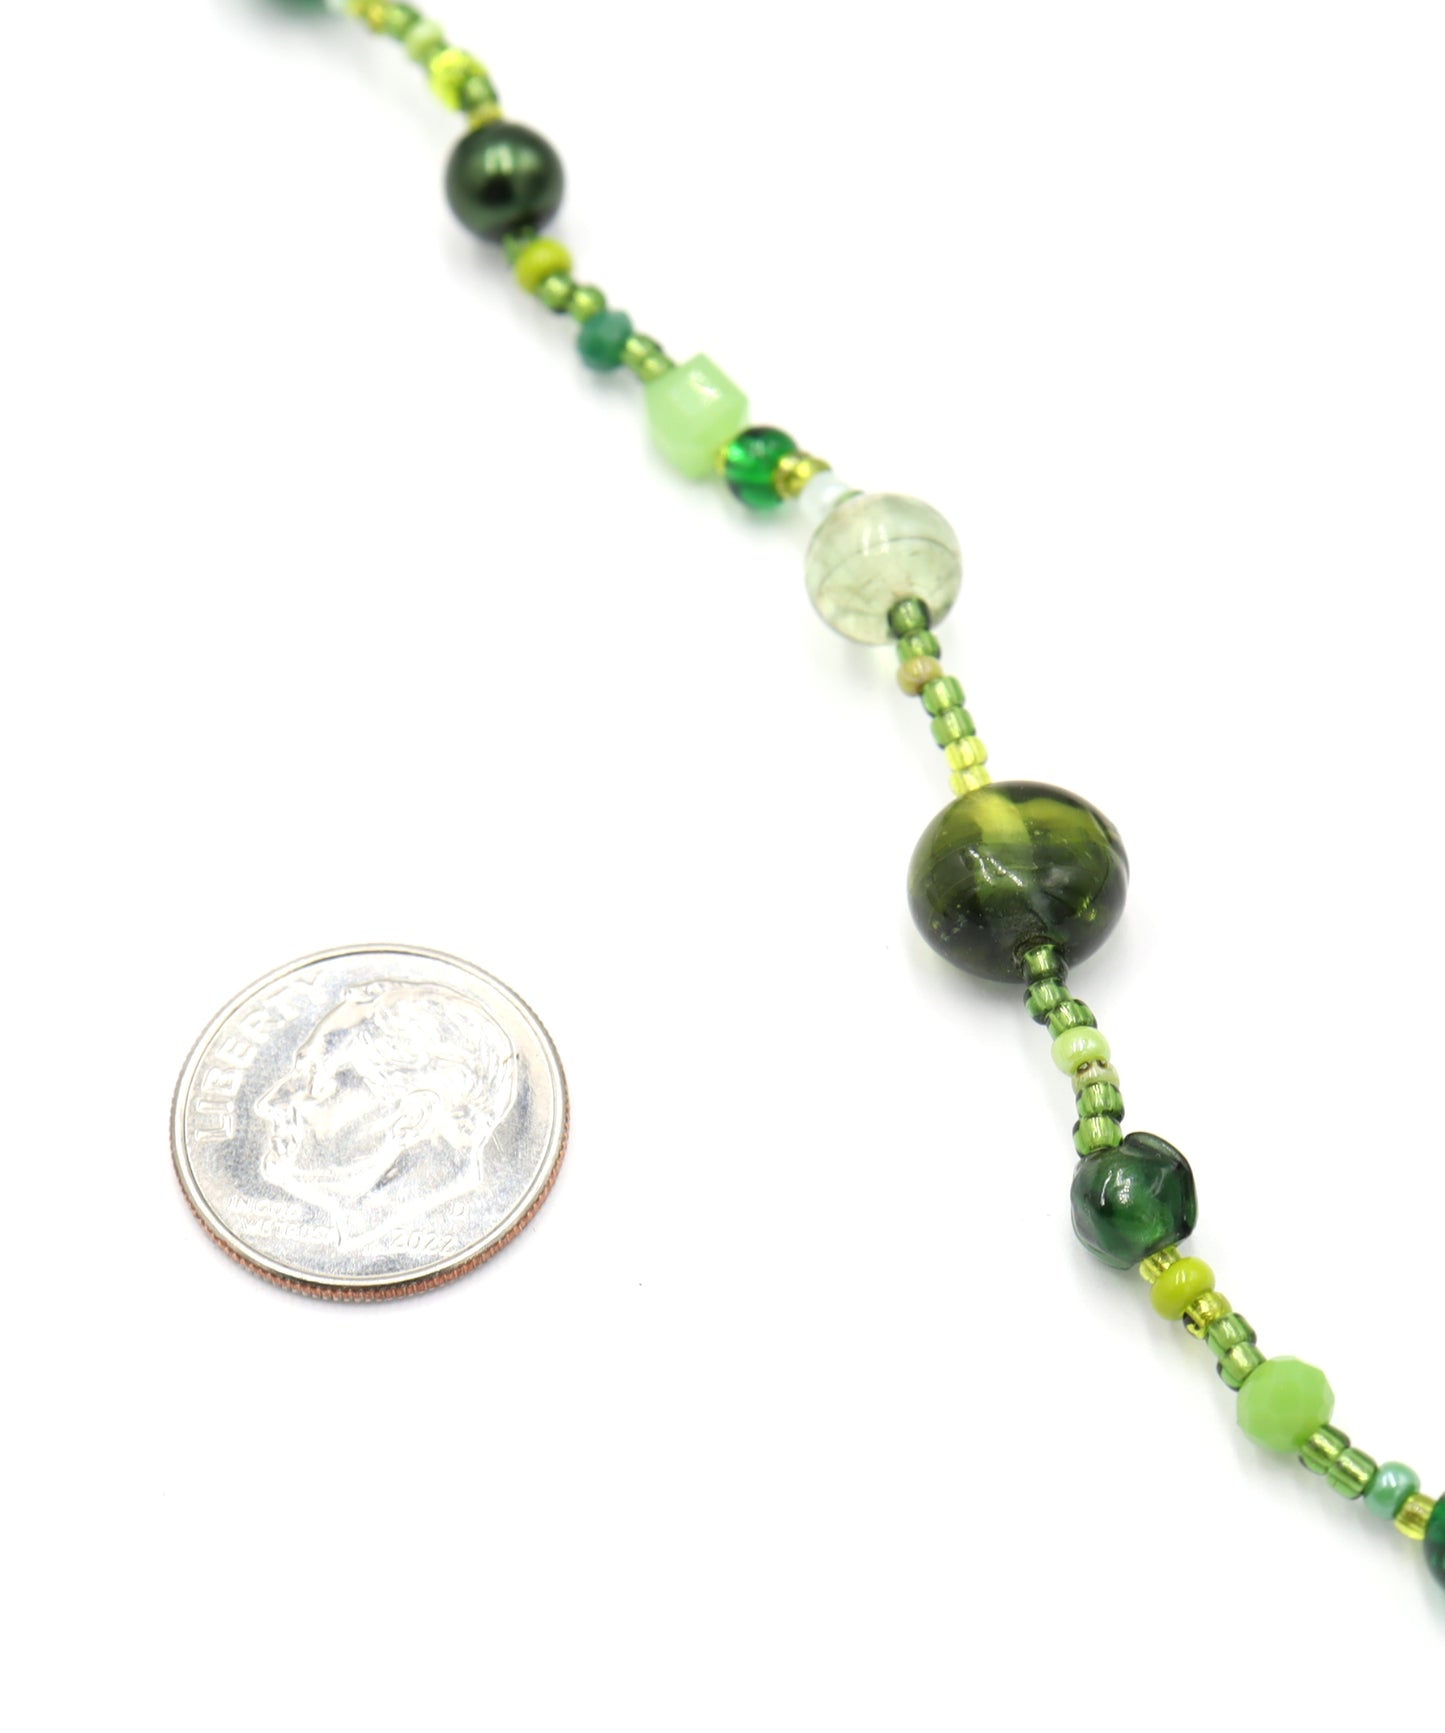 This Necklace will Make You Green with Envy – Green Queen 35” Long Party Necklace by Monkey’s Mojo